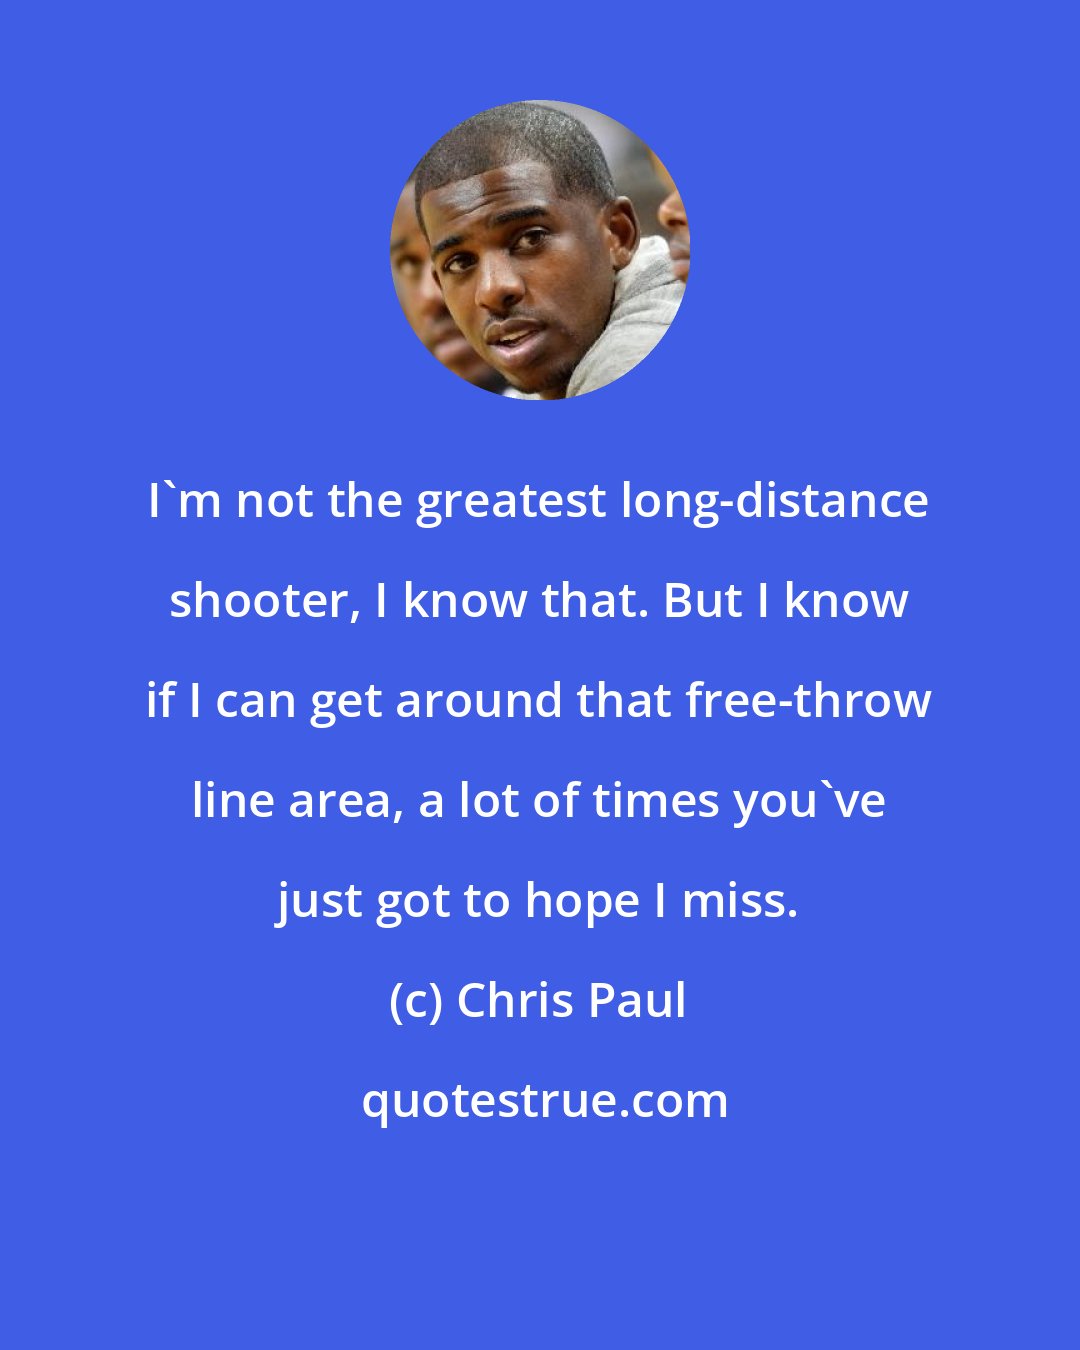 Chris Paul: I'm not the greatest long-distance shooter, I know that. But I know if I can get around that free-throw line area, a lot of times you've just got to hope I miss.